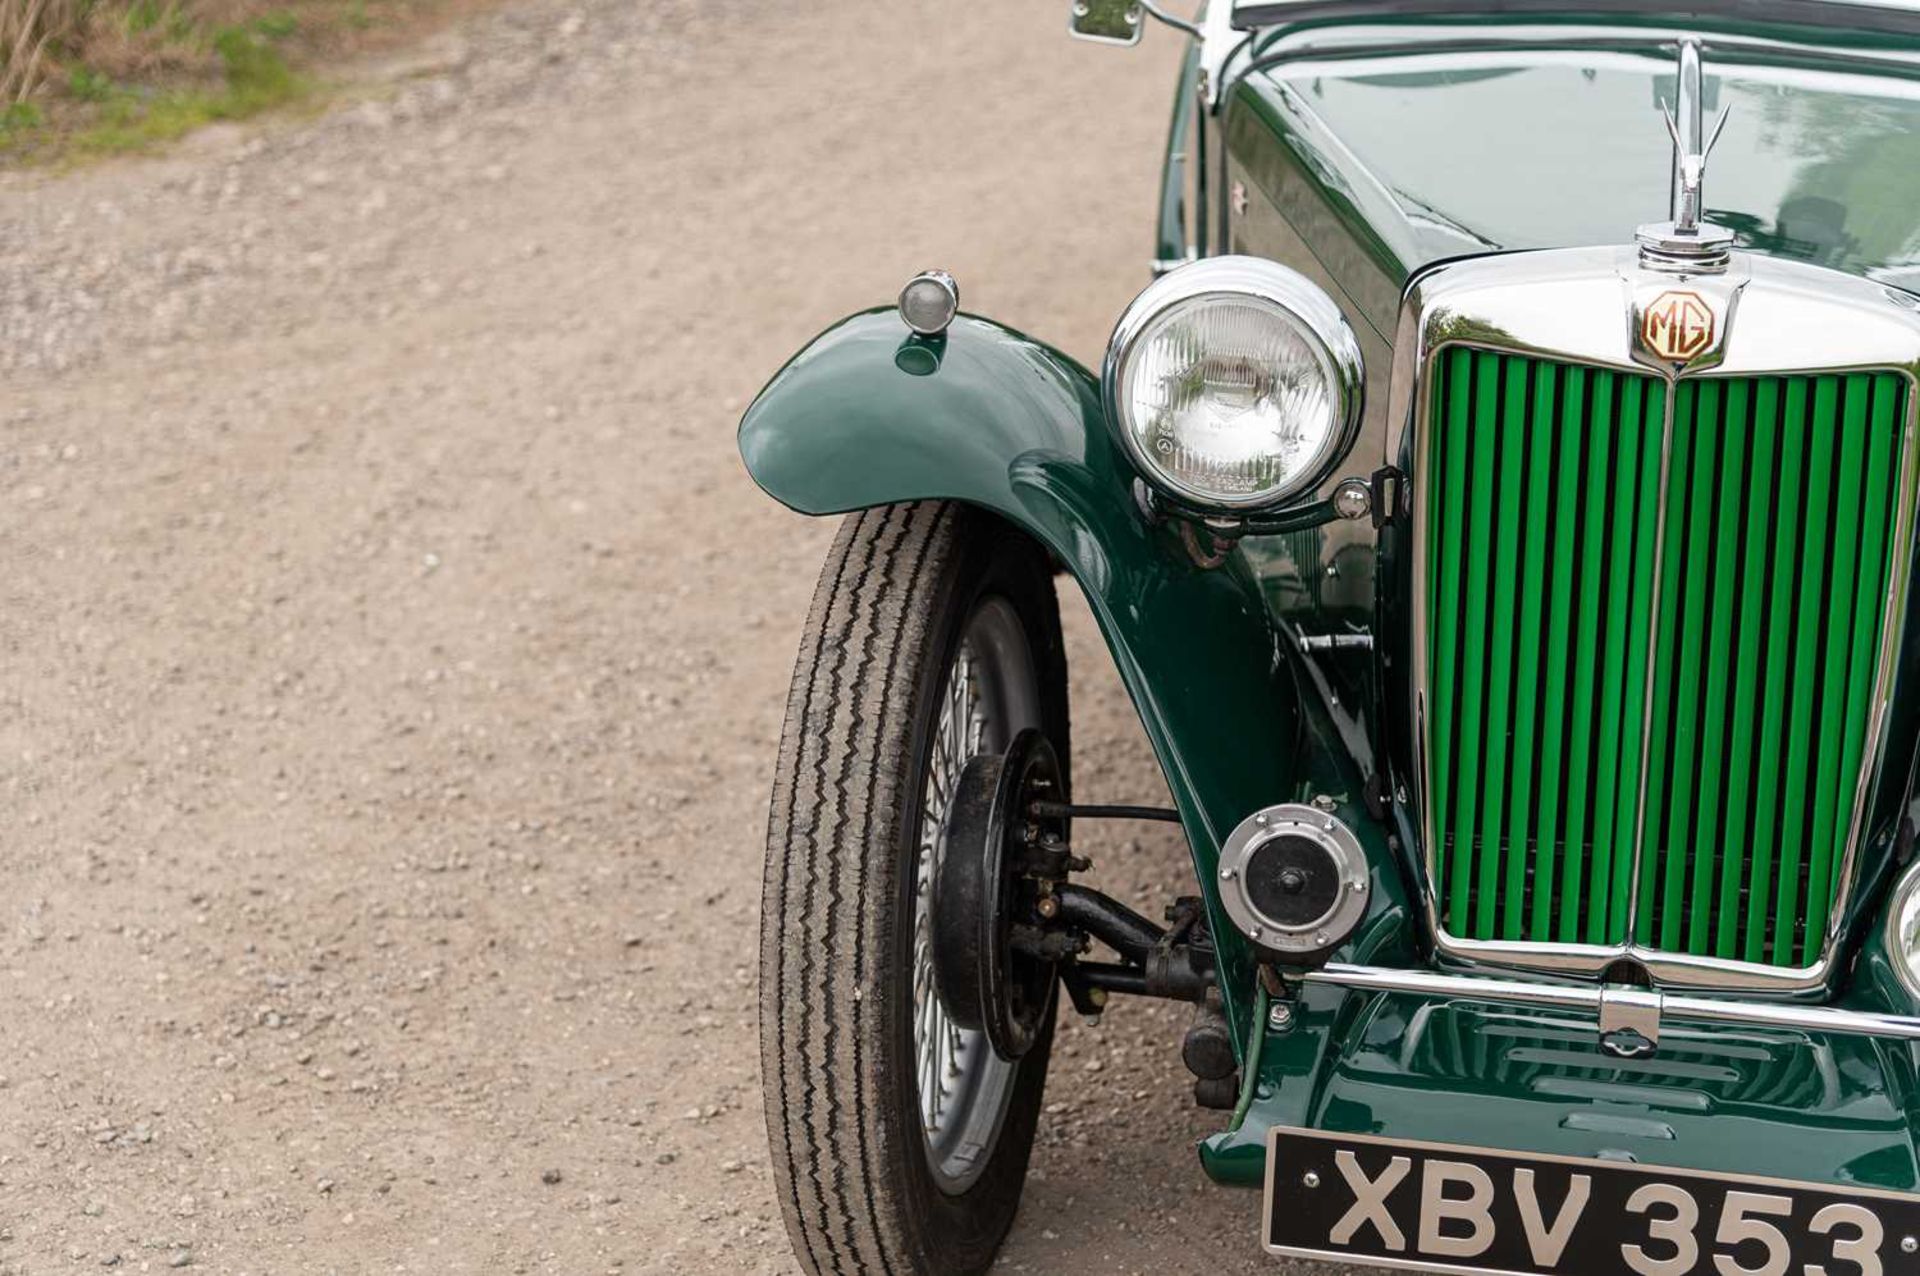 1947 MG TC Midget  Fully restored, right-hand-drive UK home market example - Image 43 of 76